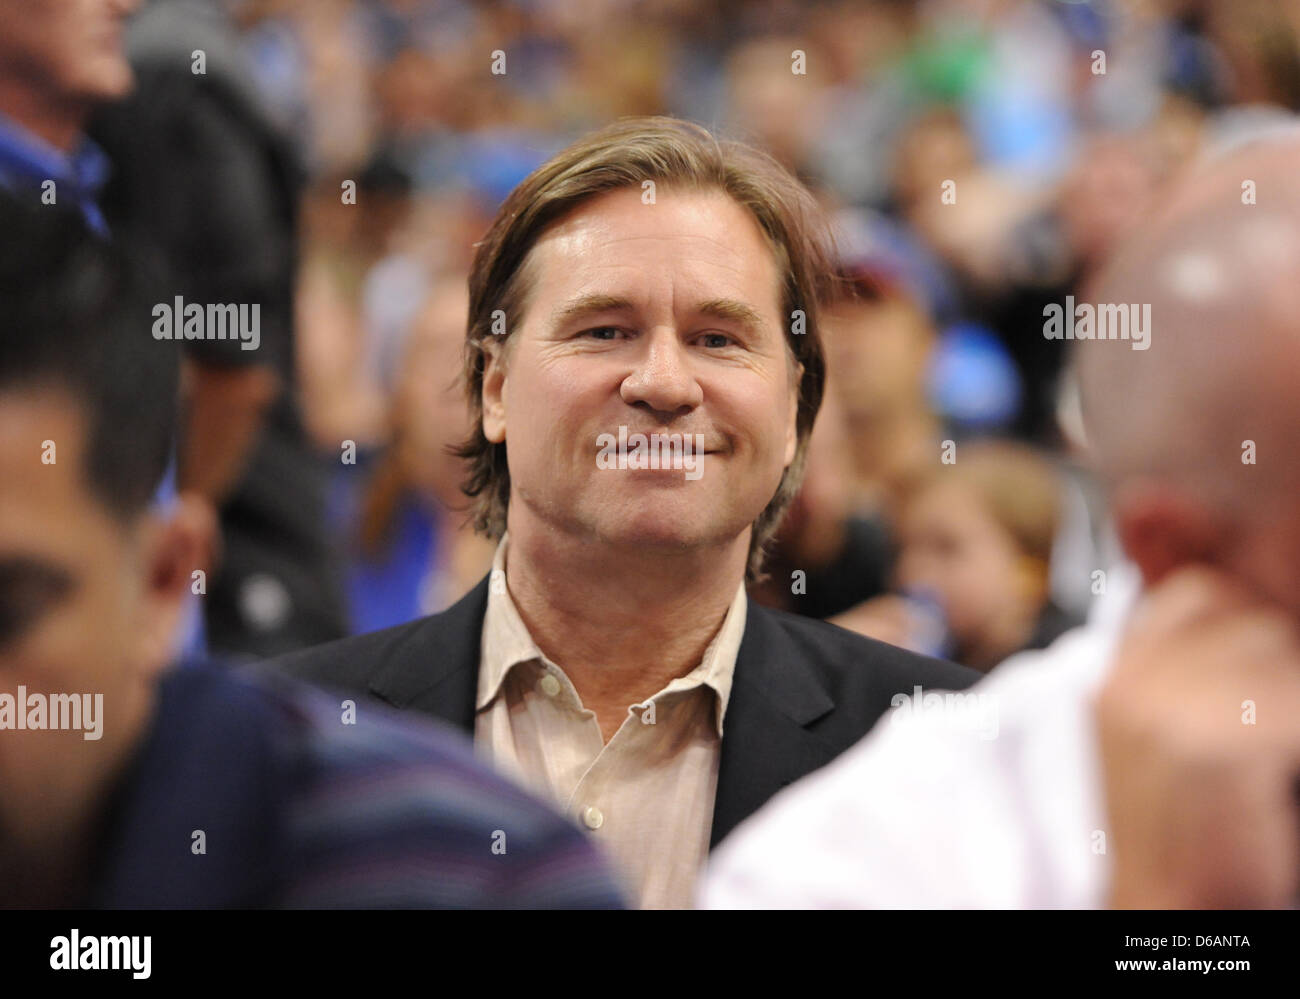 Apr 15, 2013: Actor Val Kilmer sits in the crowd during an NBA game between the Memphis Grizzlies and the Dallas Mavericks at the American Airlines Center in Dallas, TX Memphis defeated Dallas 103-97 Stock Photo